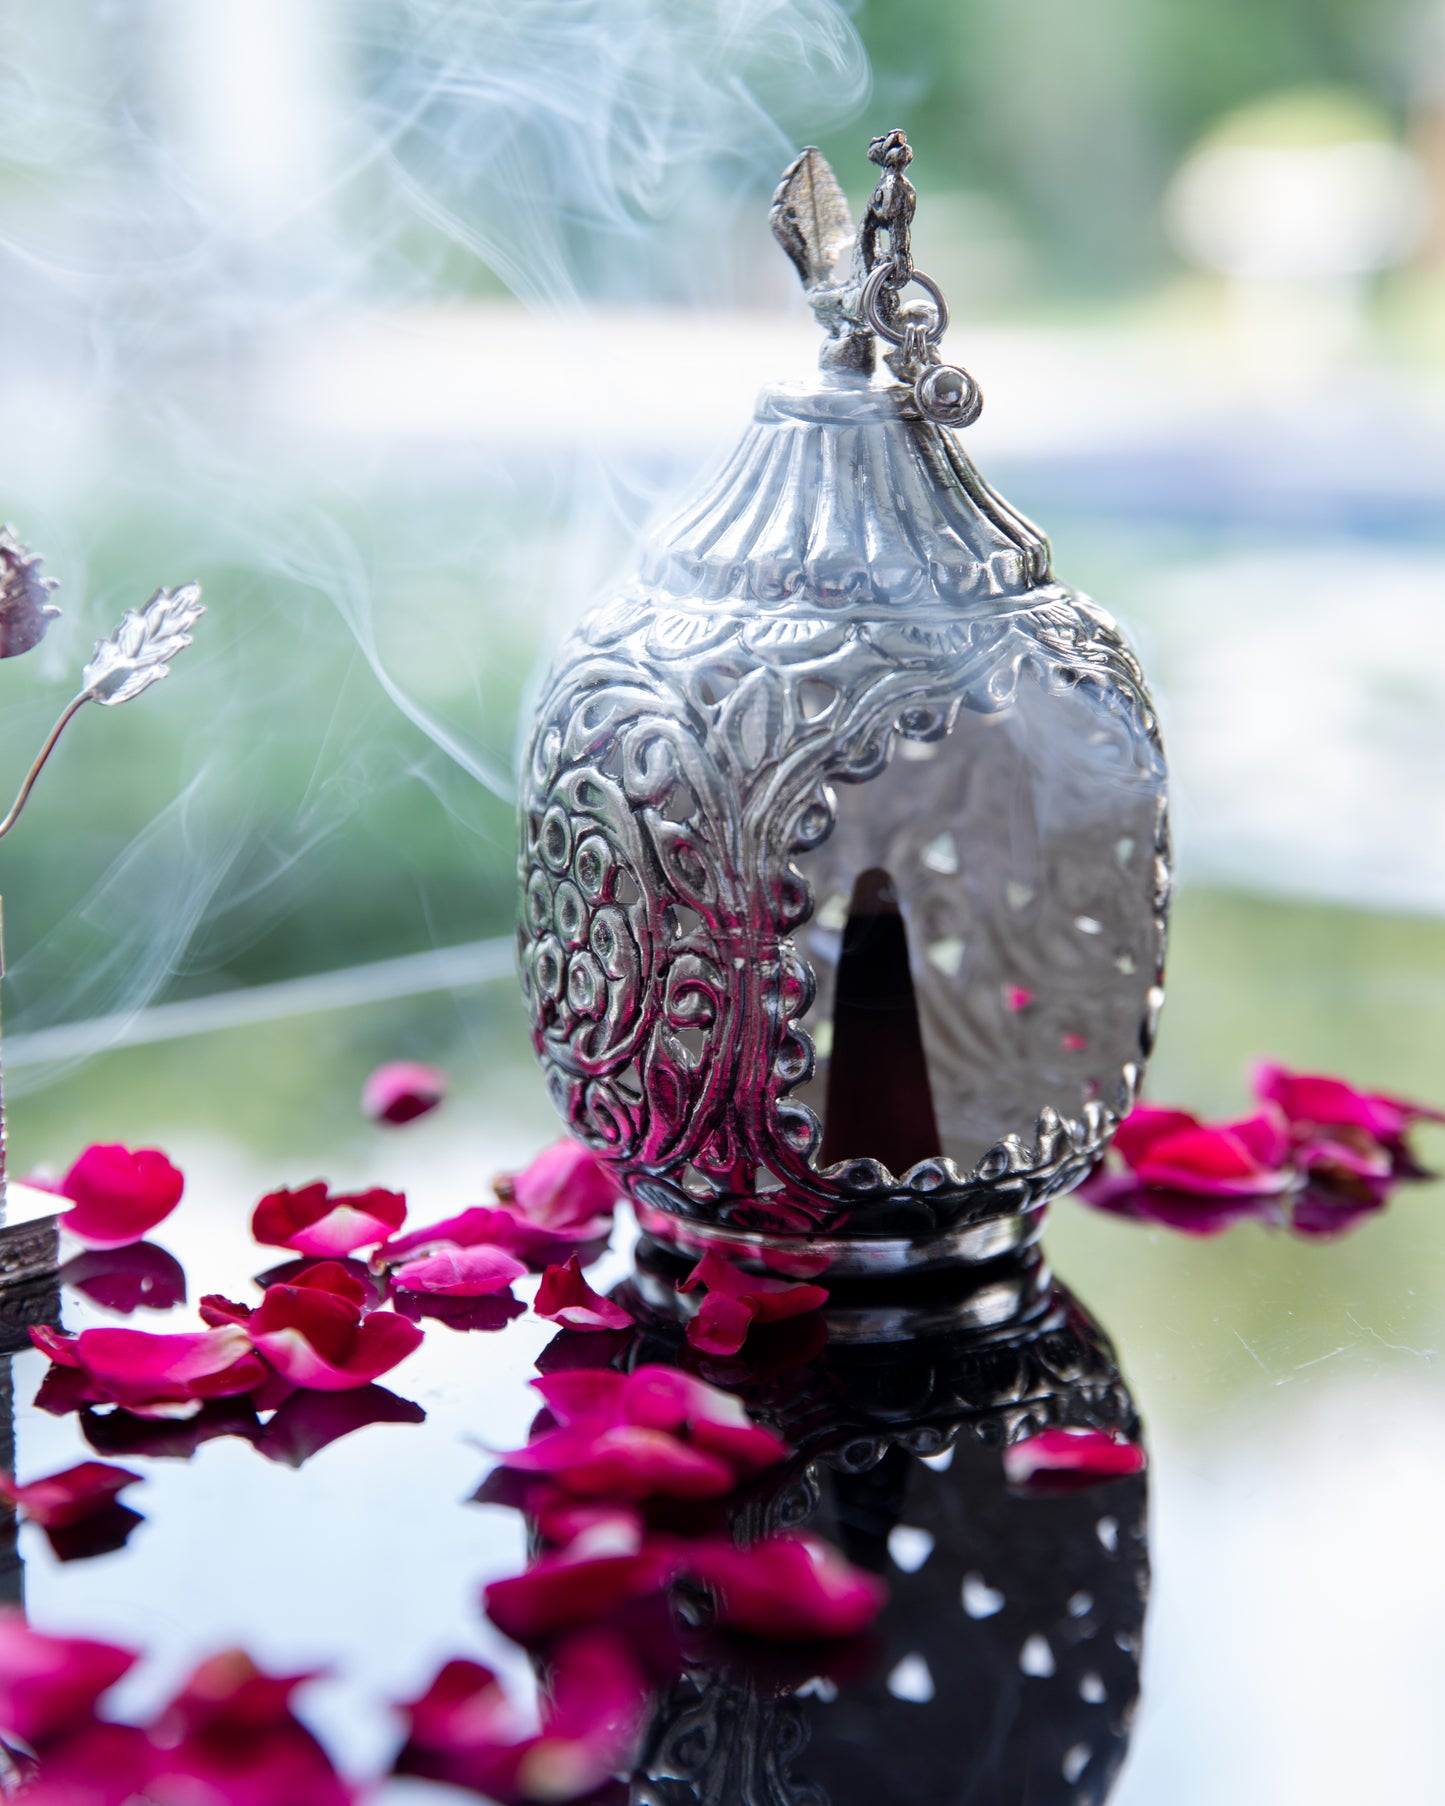 Coated with high-quality silver, this dhoop dhani radiates a lustrous and timeless glow.